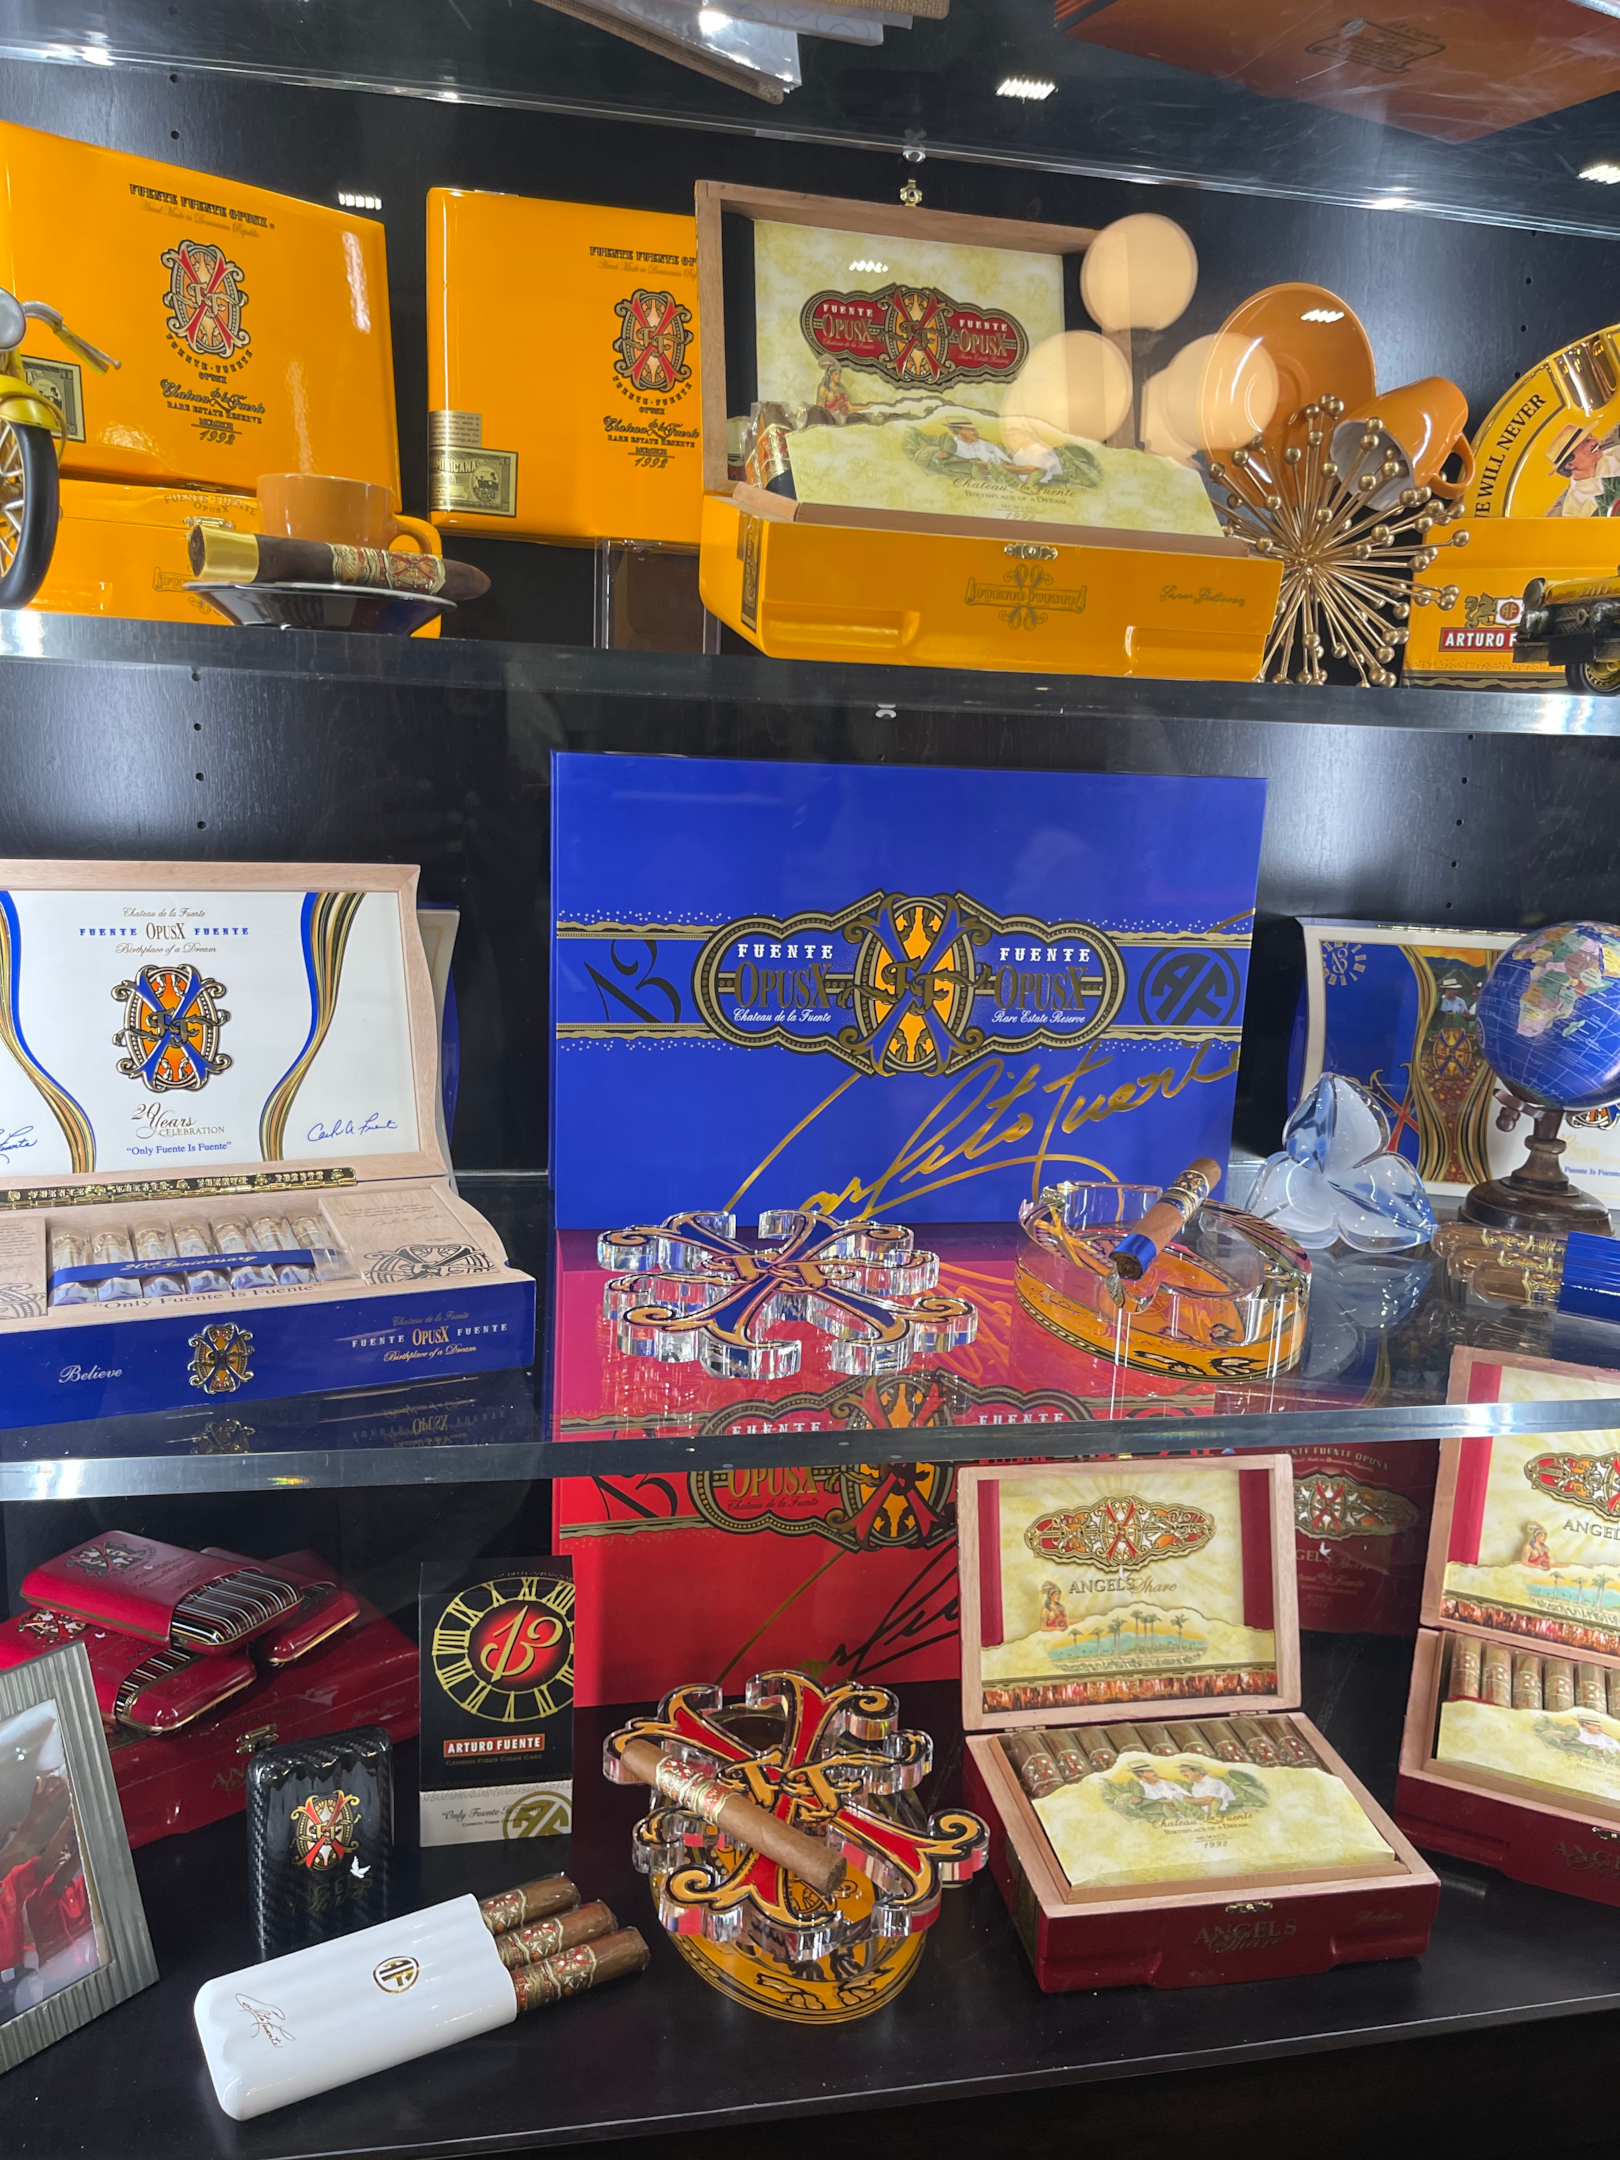 Arturo Fuente offers an amazing selection of premium handmade cigars, Oro Oscuro, The Blue and the Pink